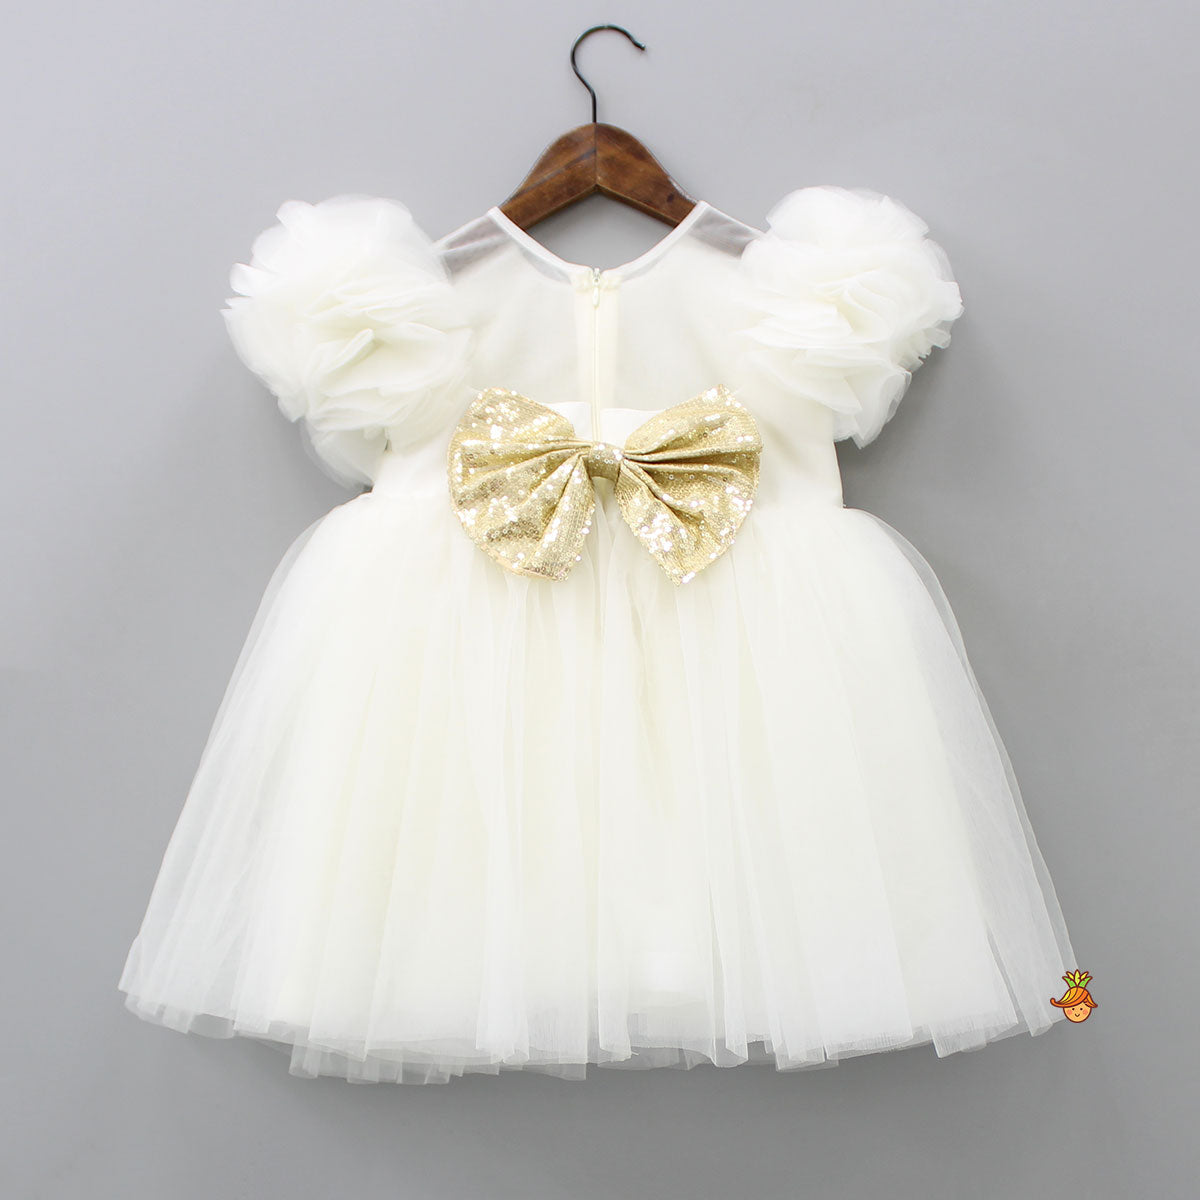 Pre Order: Checks Embroidered Yoke Off White Dress With Back Sequined Bow